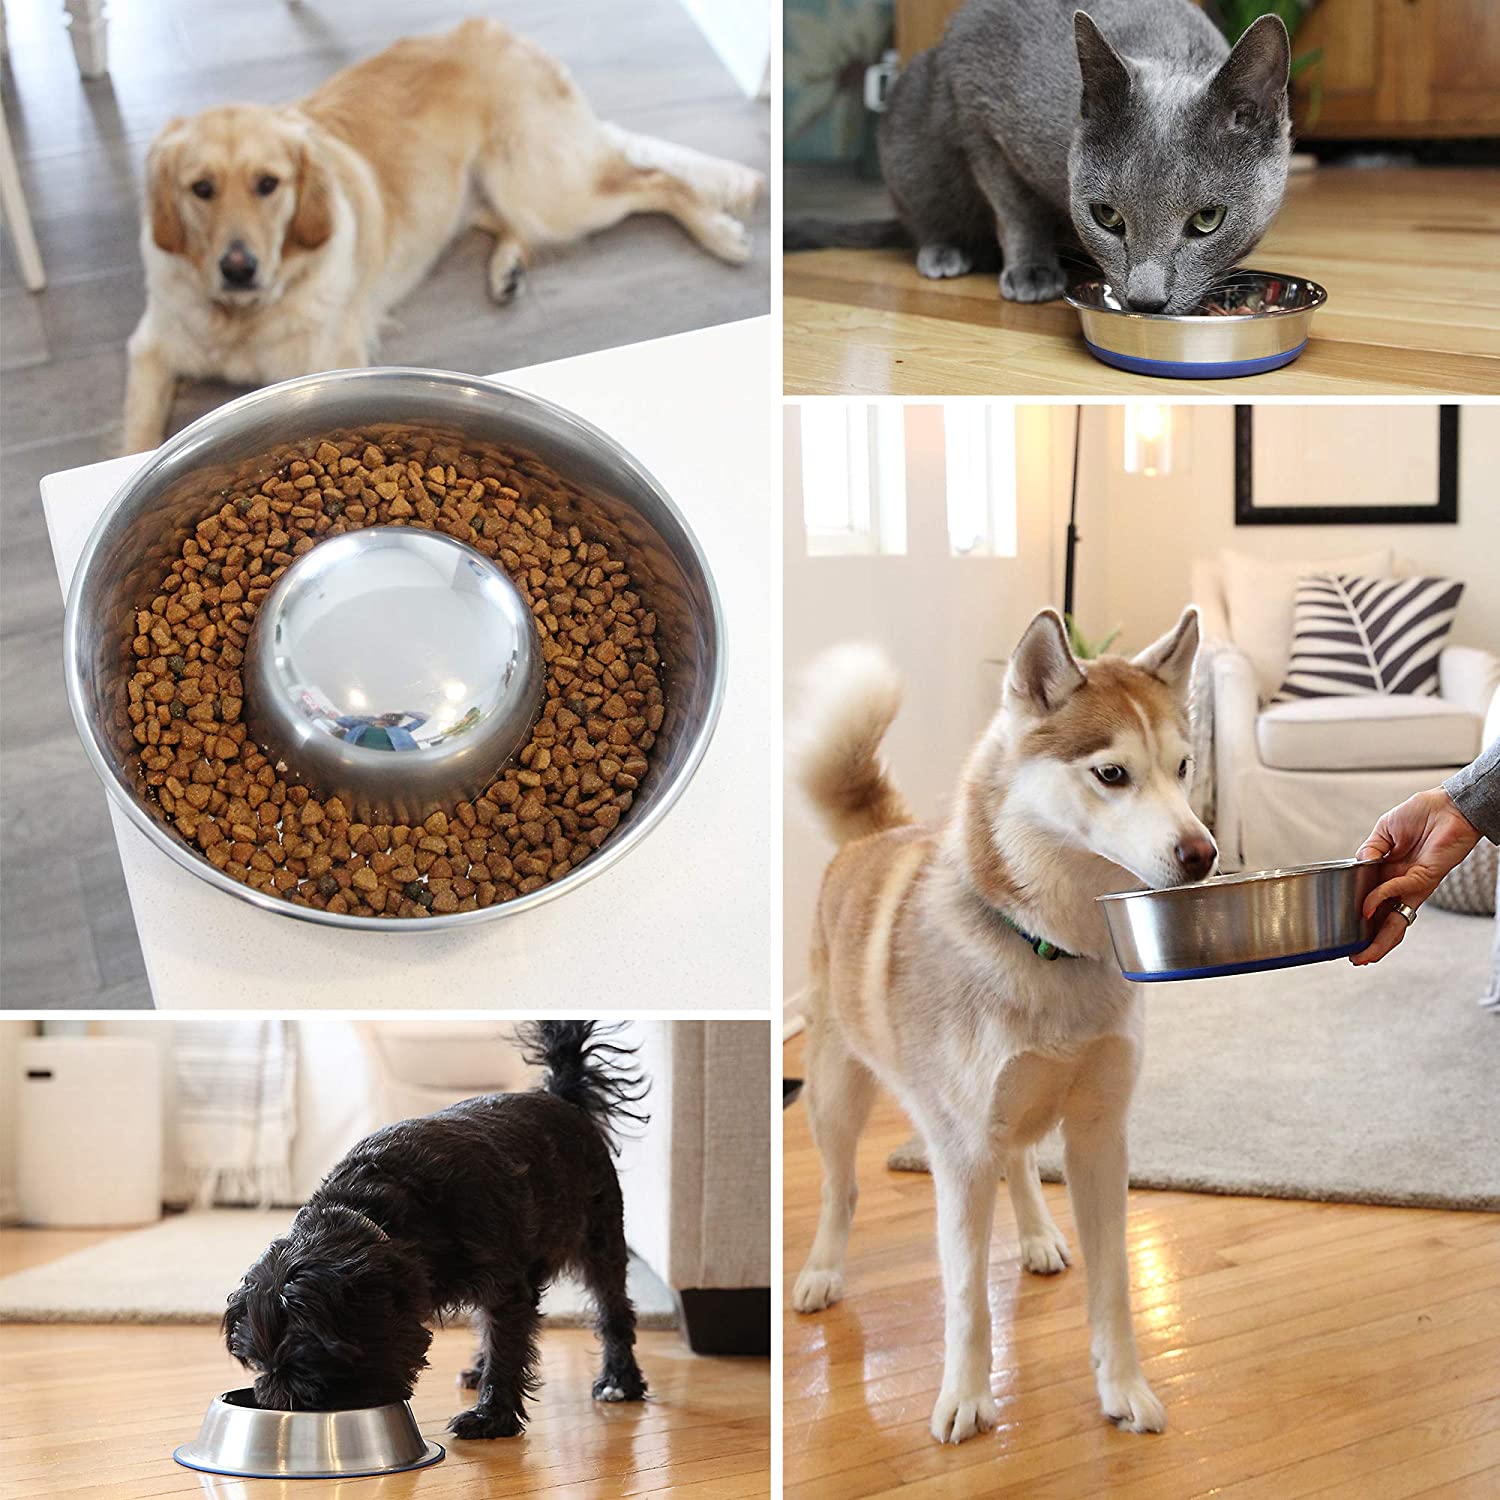 OurPets Premium Stainless Steel Slow Feed Dog Bowl